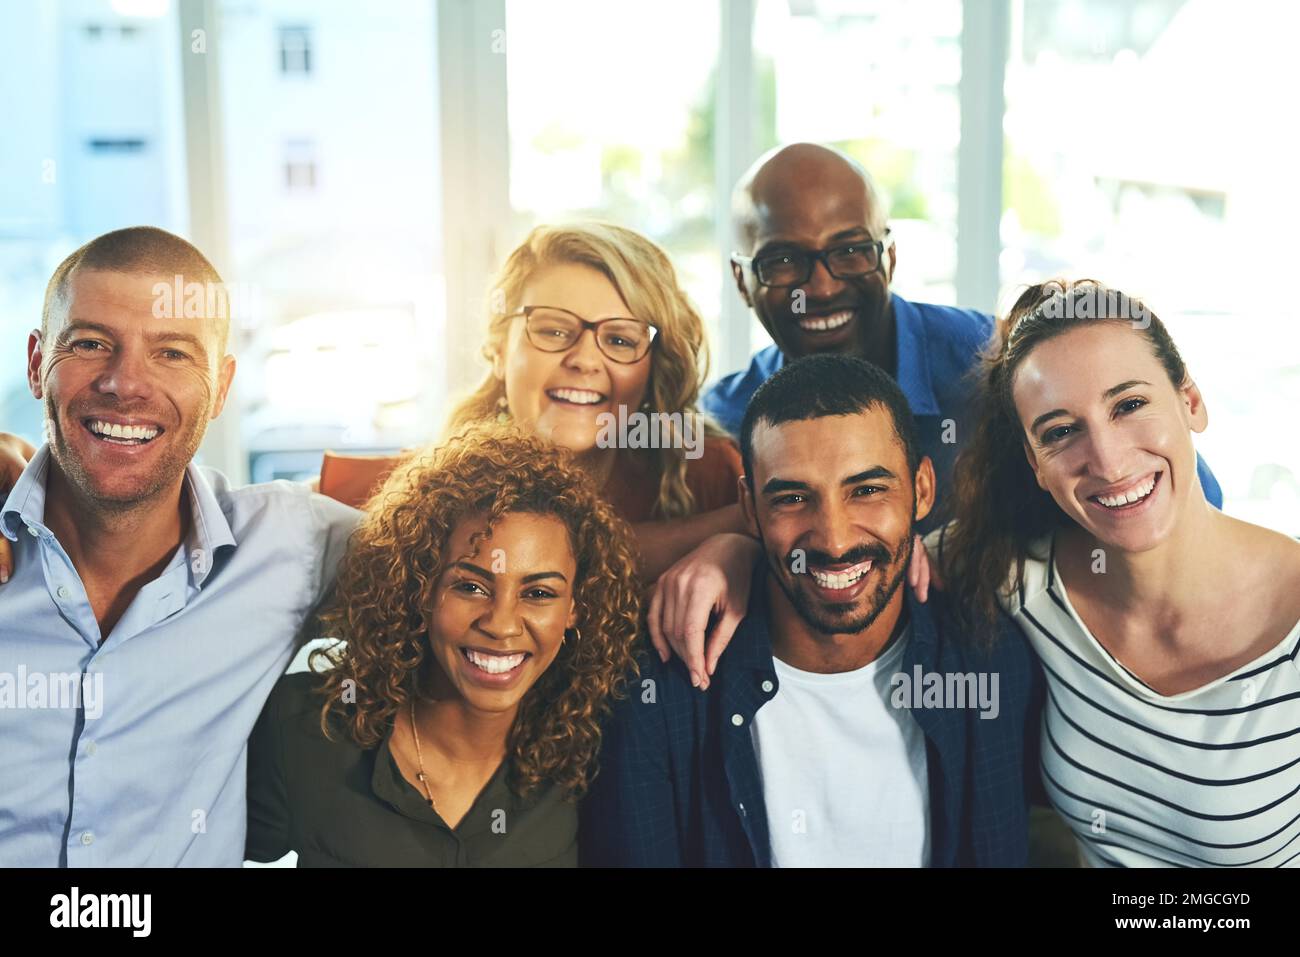 We were made to be friends. a group cheerful friends posing for a portrait while standing inside of a building. Stock Photo